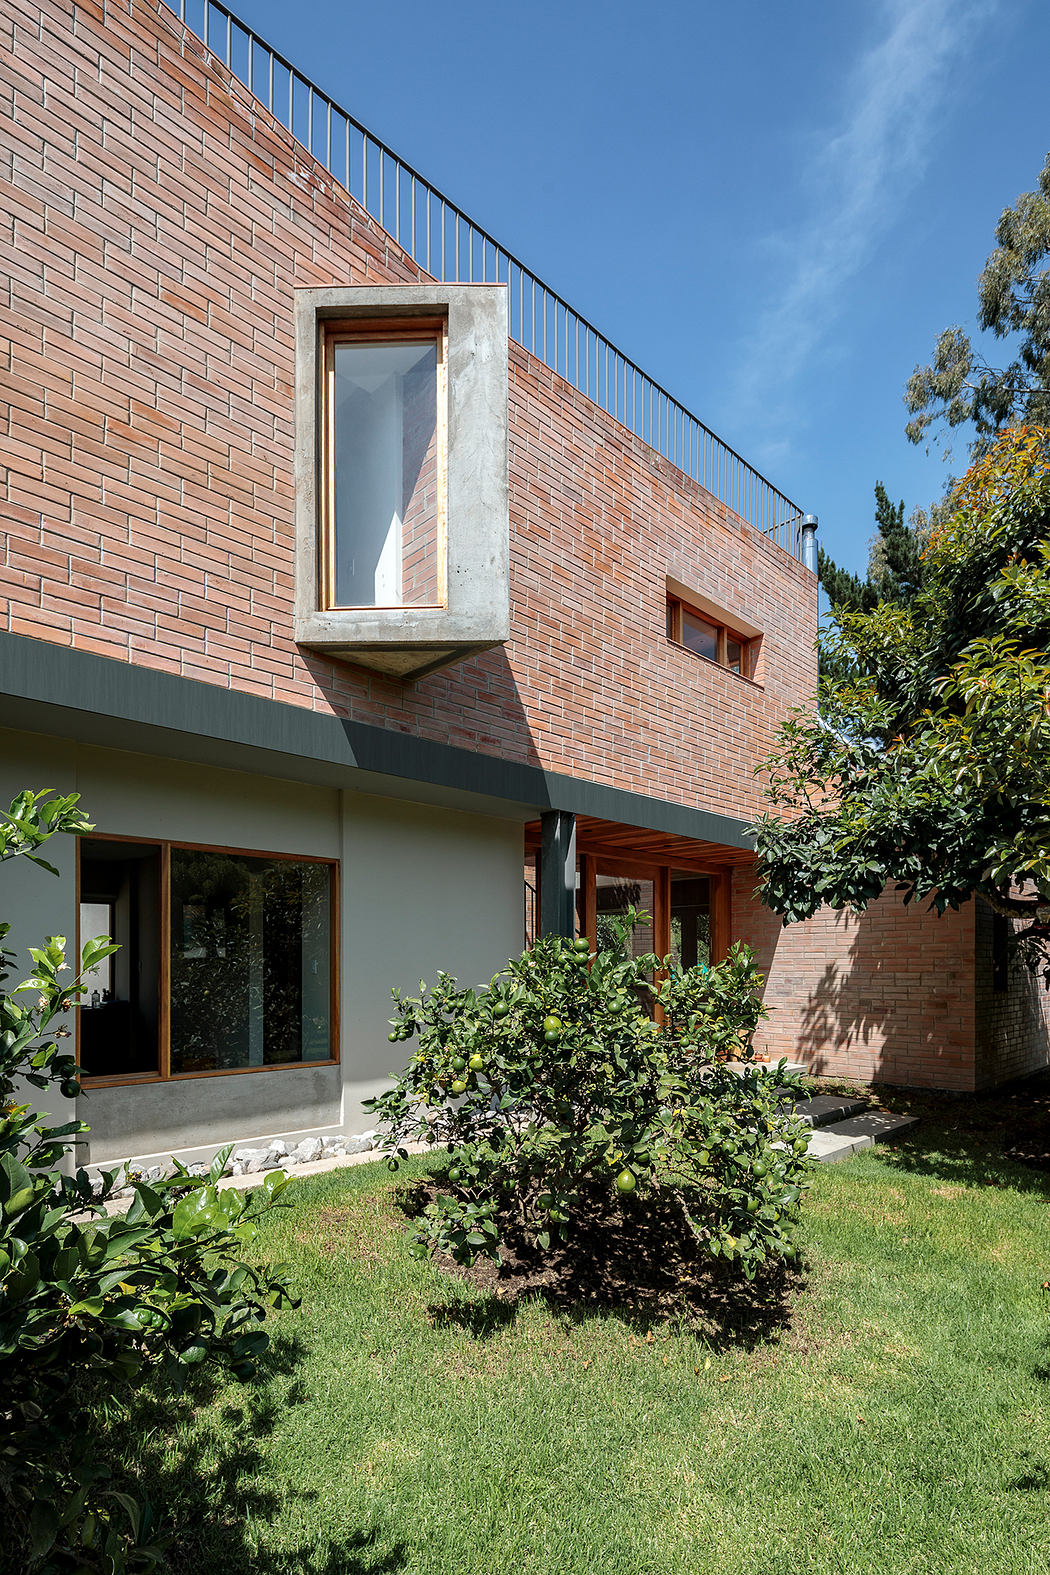 Brick facade with concrete window frames, surrounded by lush greenery and a lawn.